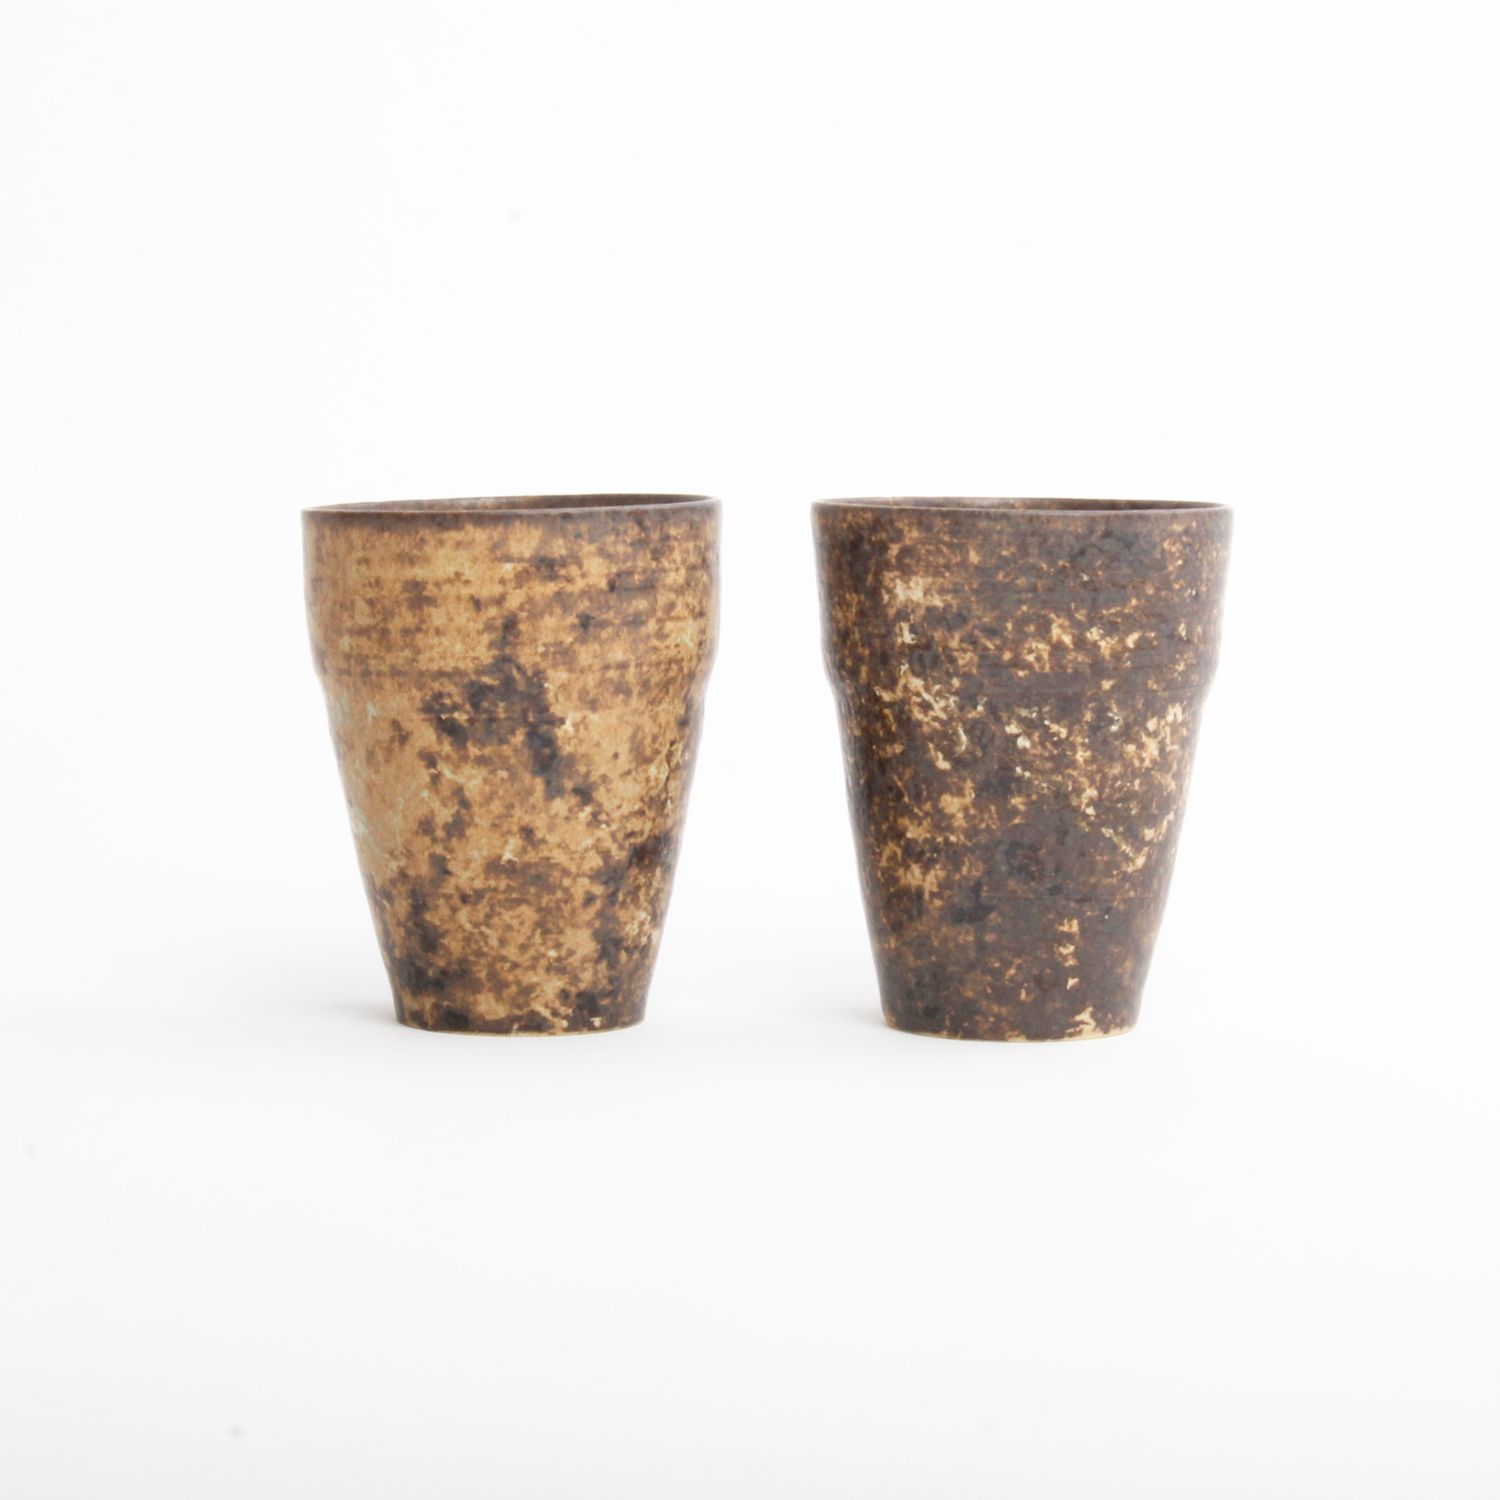 Makiko Hicher: Brown Cup Product Image 1 of 4